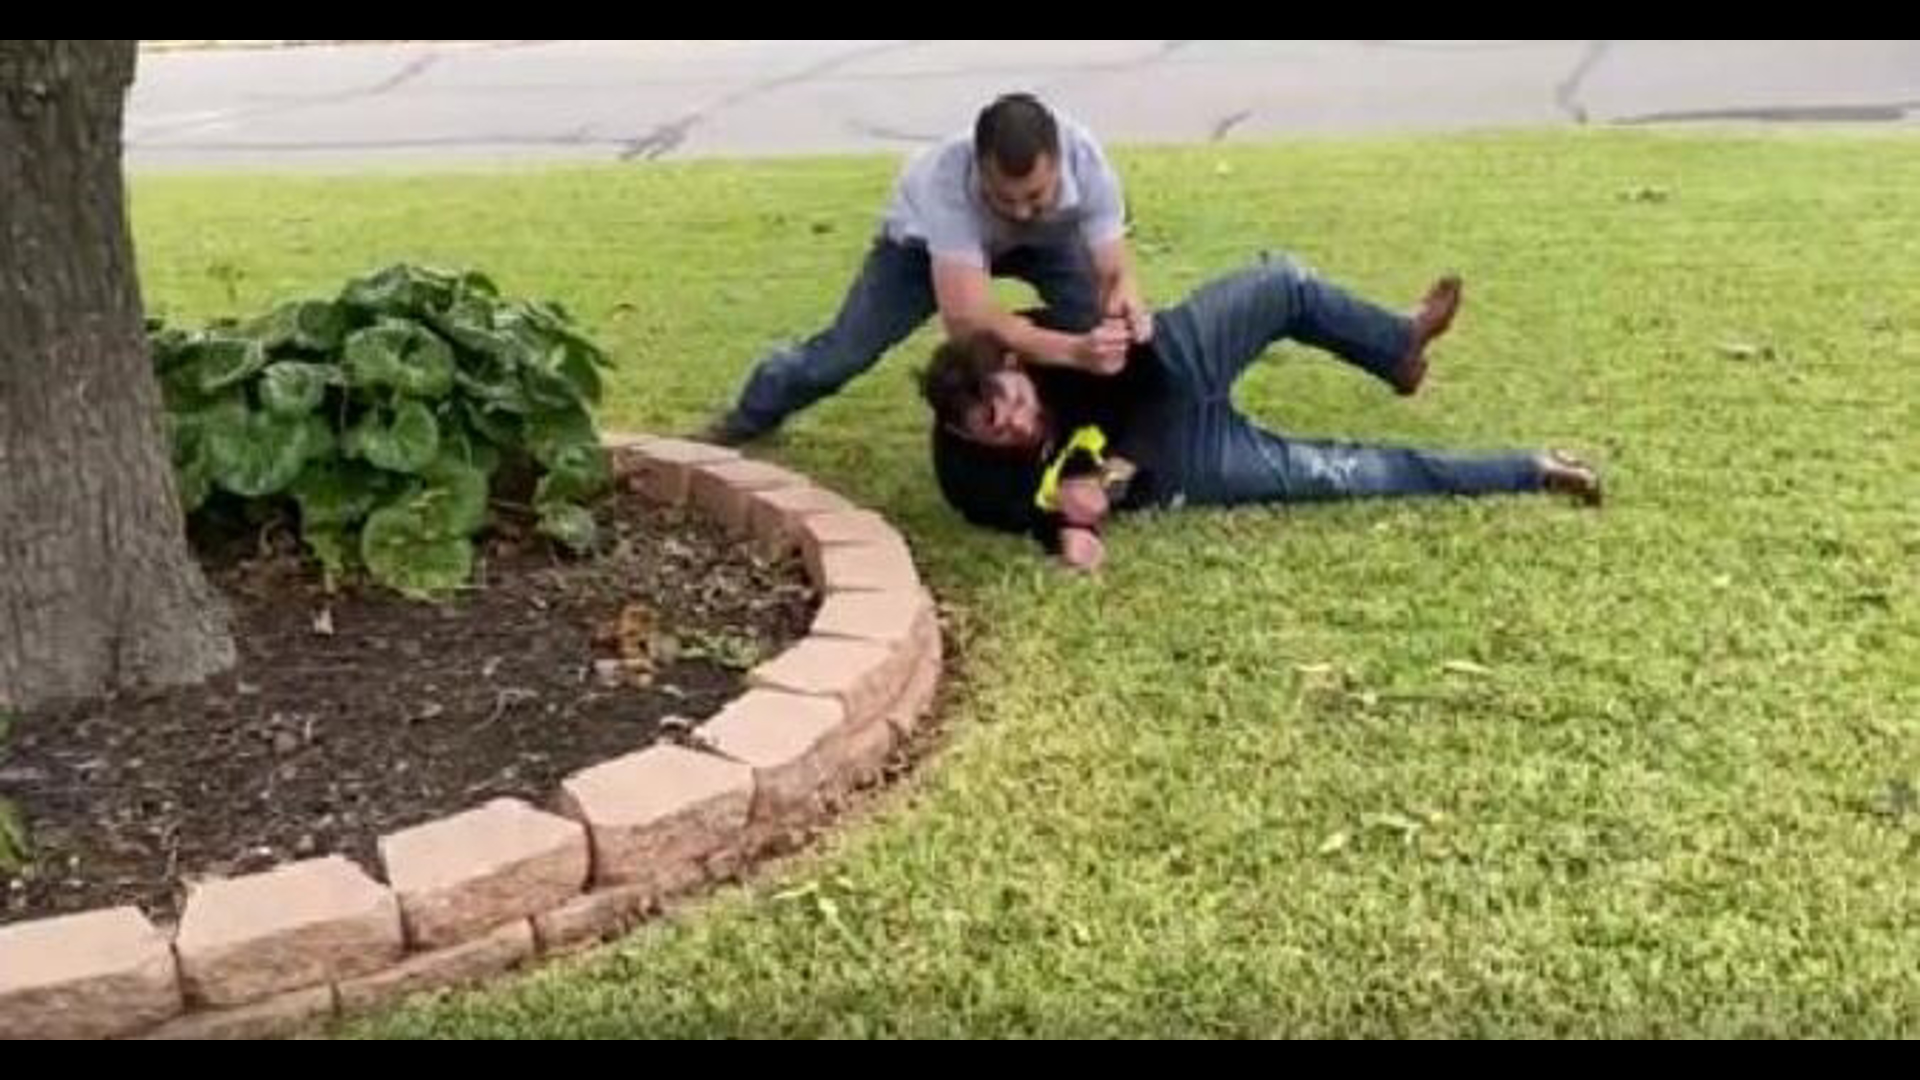 A newly released video from the Lake Worth Police Department shows Dylan Molina pinned down by a man after the crash that killed Euless Det. Alex Cervantes.